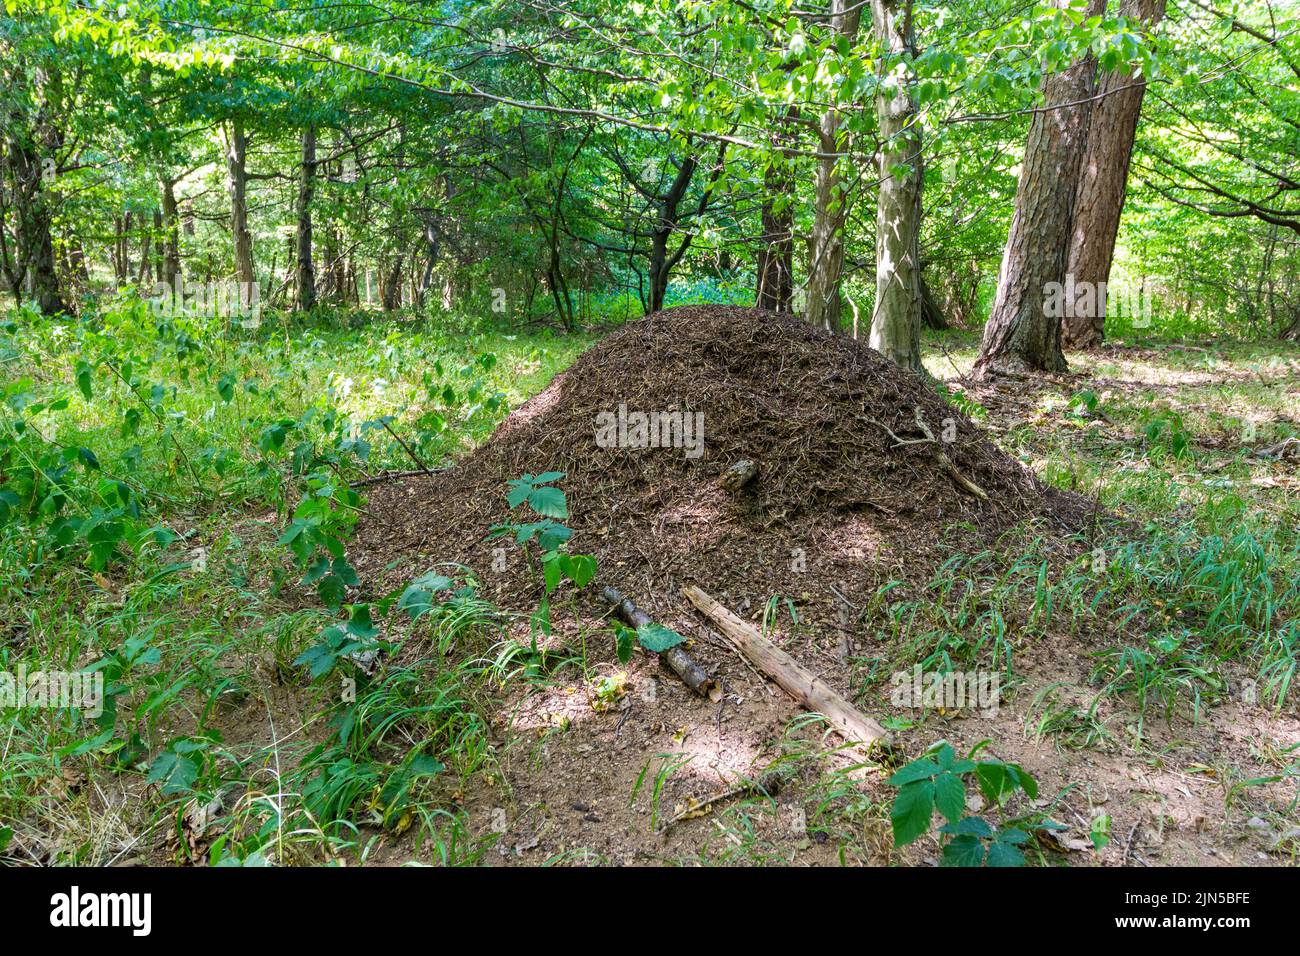 Ant nest hill in forest, Soproni-hegyseg, Sopron, Hungary Stock Photo